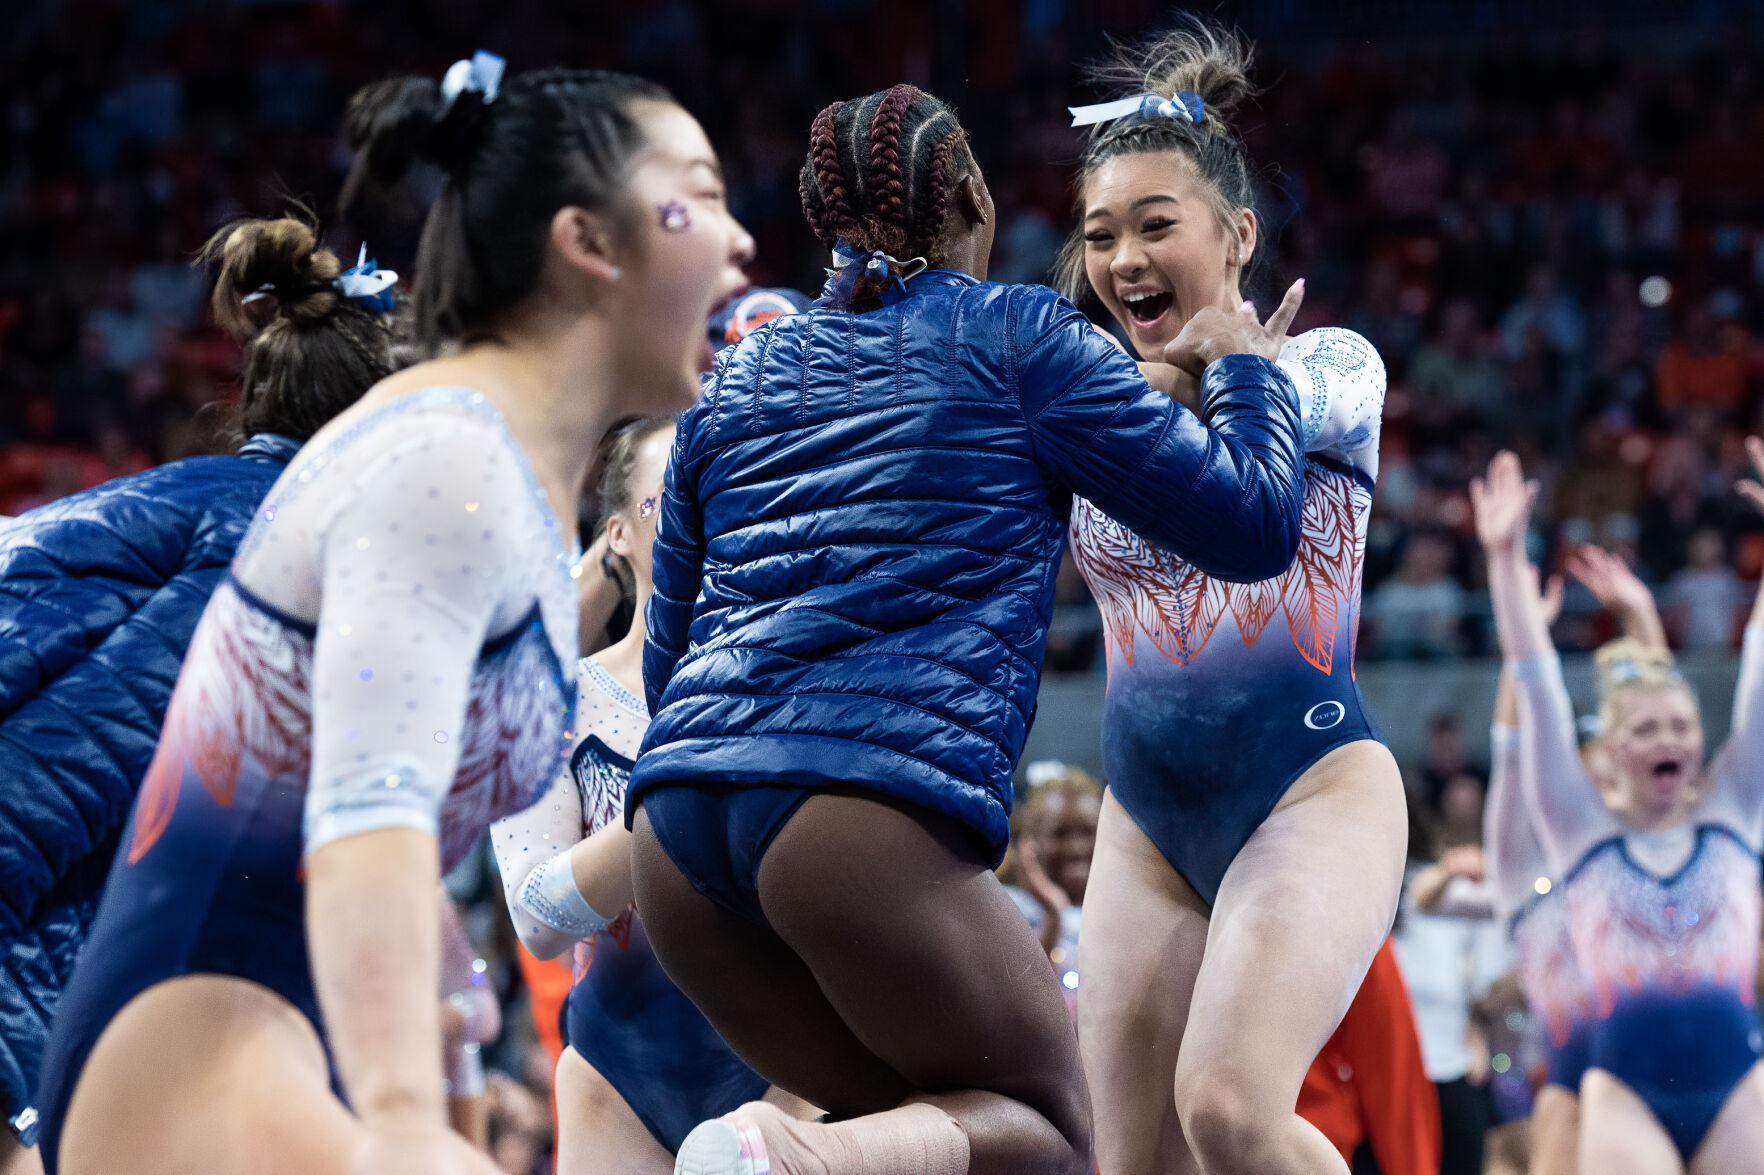 Suni Lee debuts the Nabieva at Auburn, marking the first time it’s ever